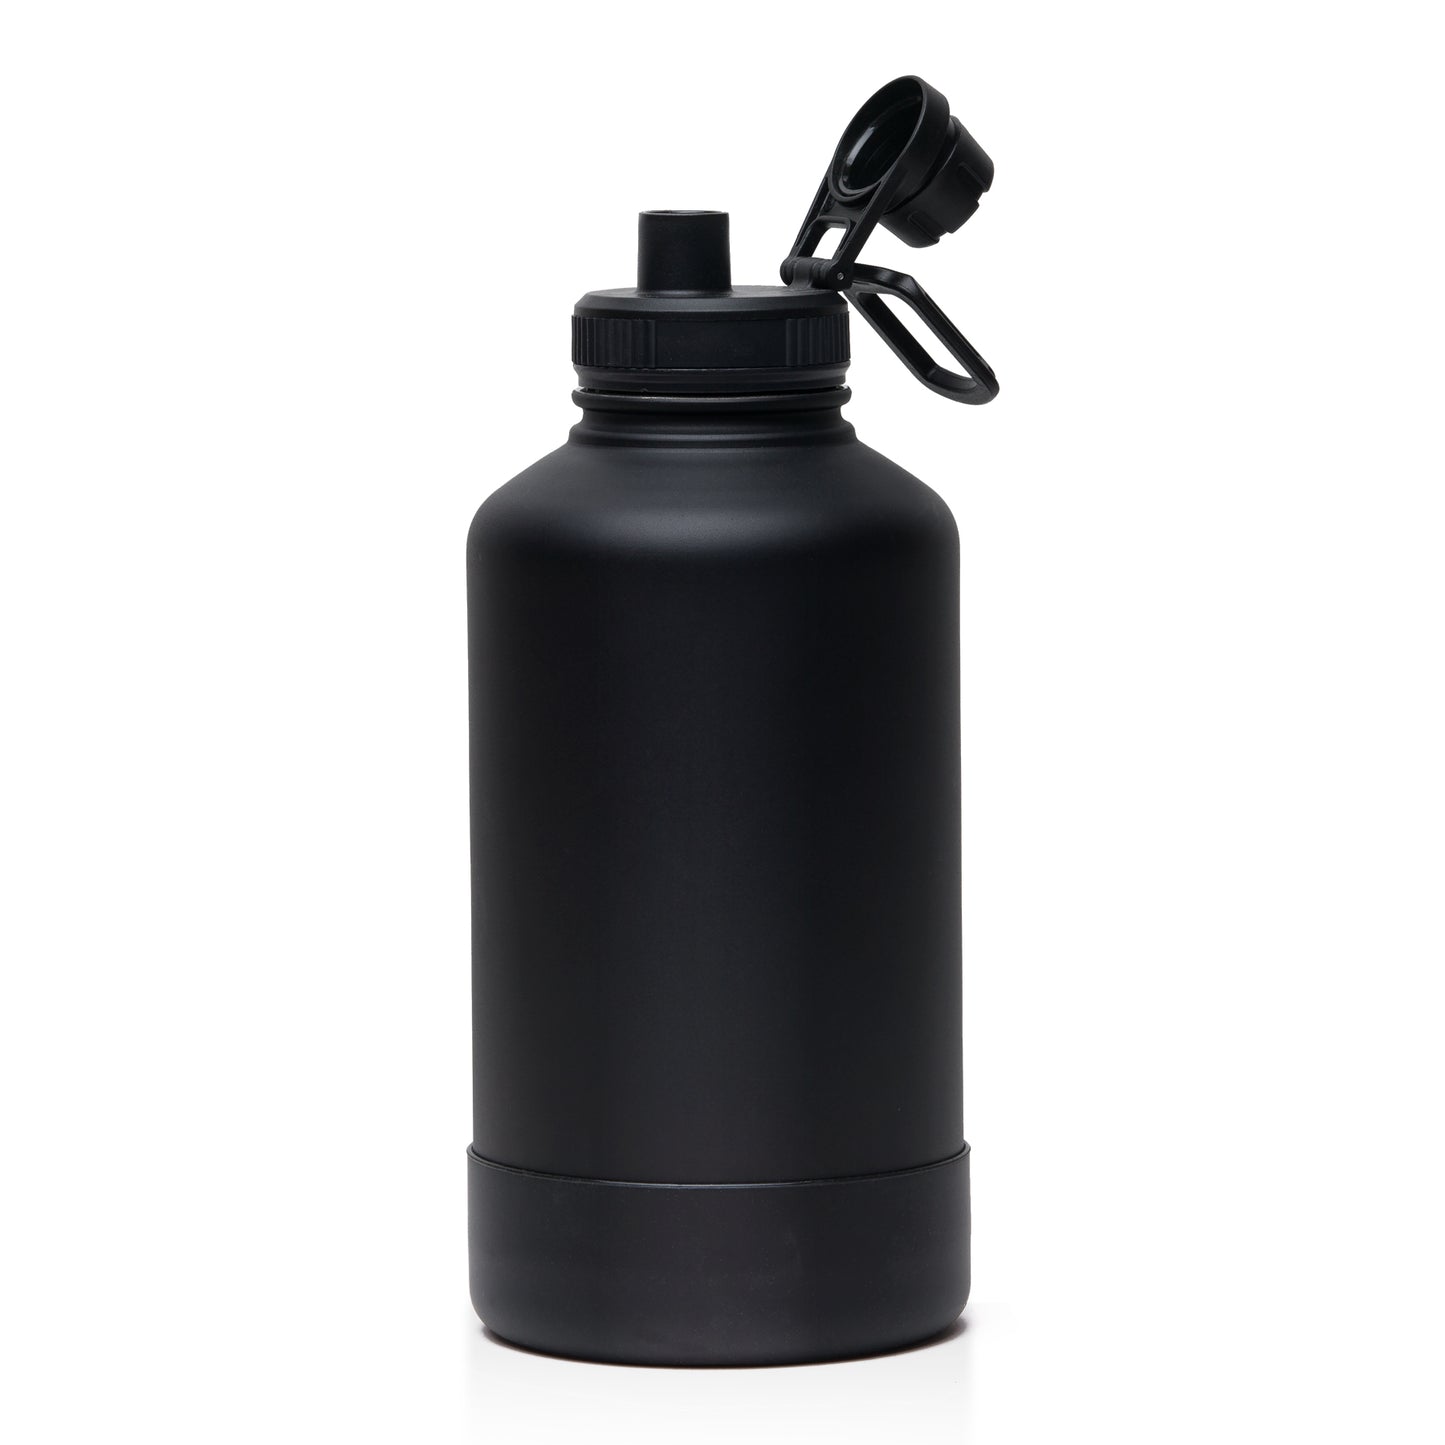 Engraved 1.9L drink bottle with pet drinking bowl